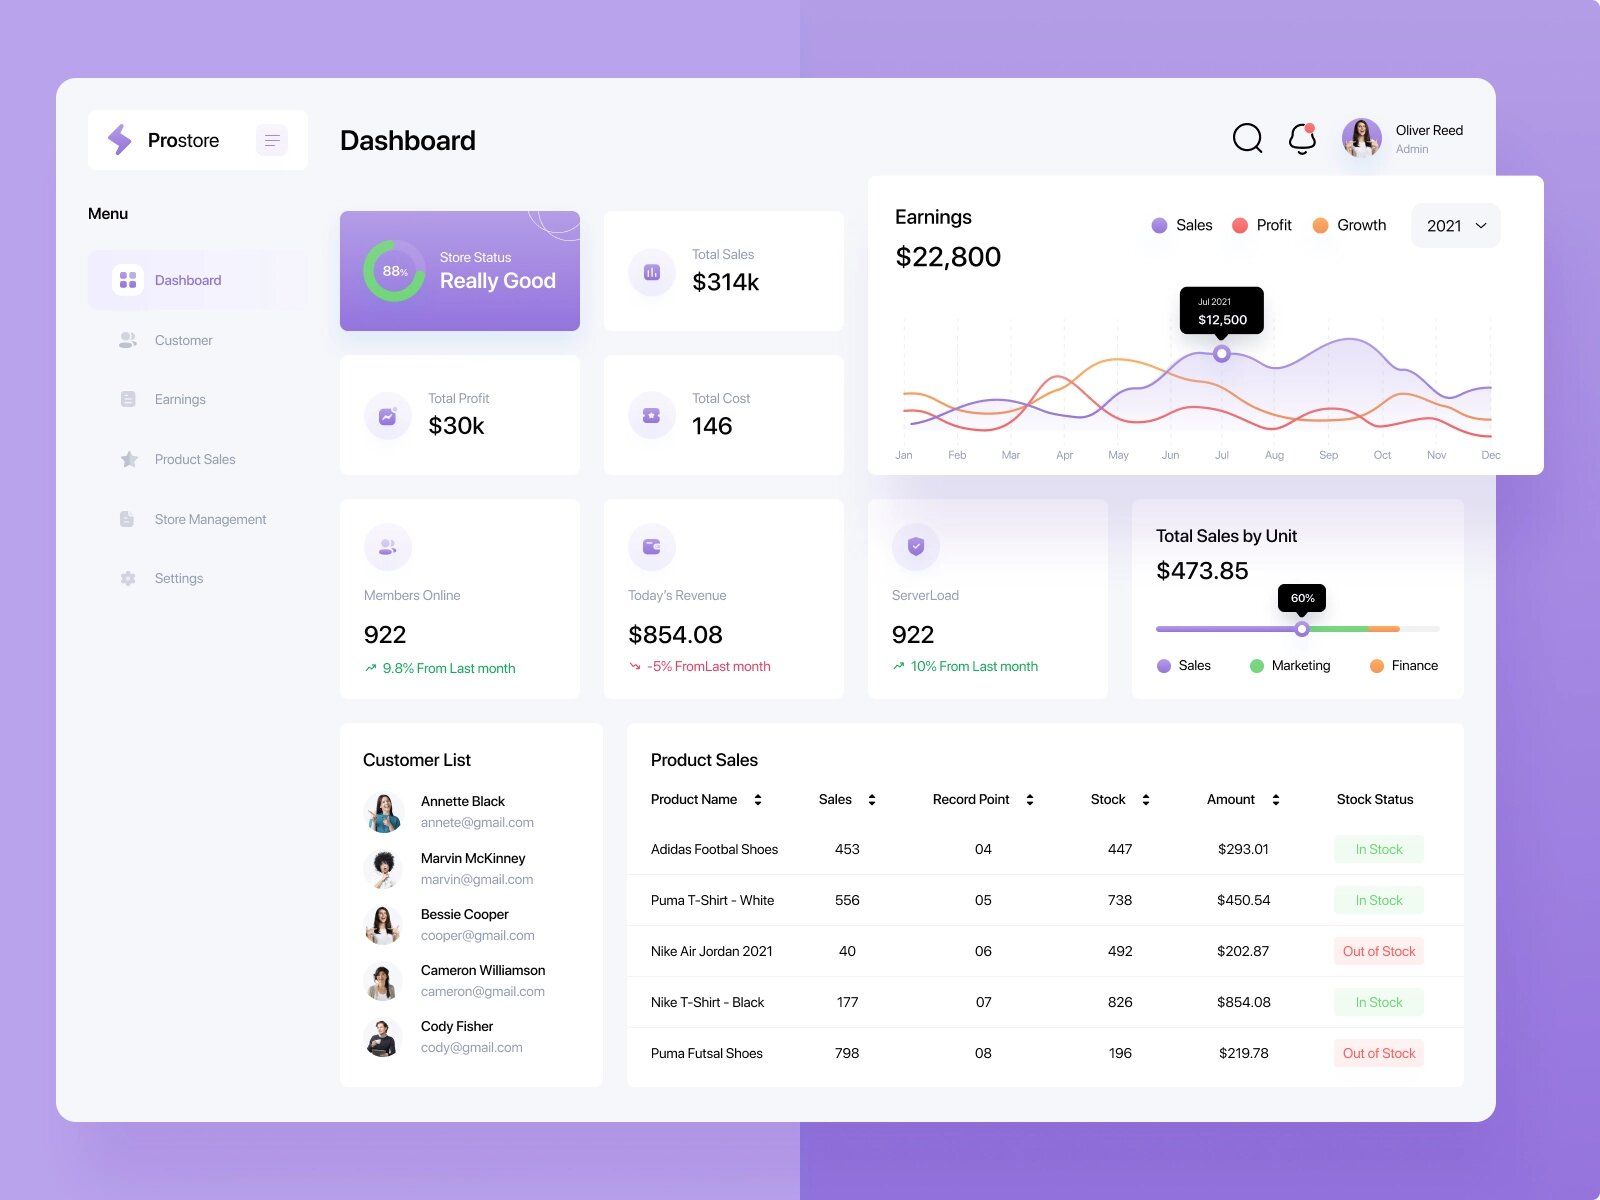 You can enable analytical features in your accounting software so that you can track dynamics and make predictions (*image by [Umar Aji Pratama](https://dribbble.com/umarajipratama){ rel="nofollow" target="_blank" .default-md}*)